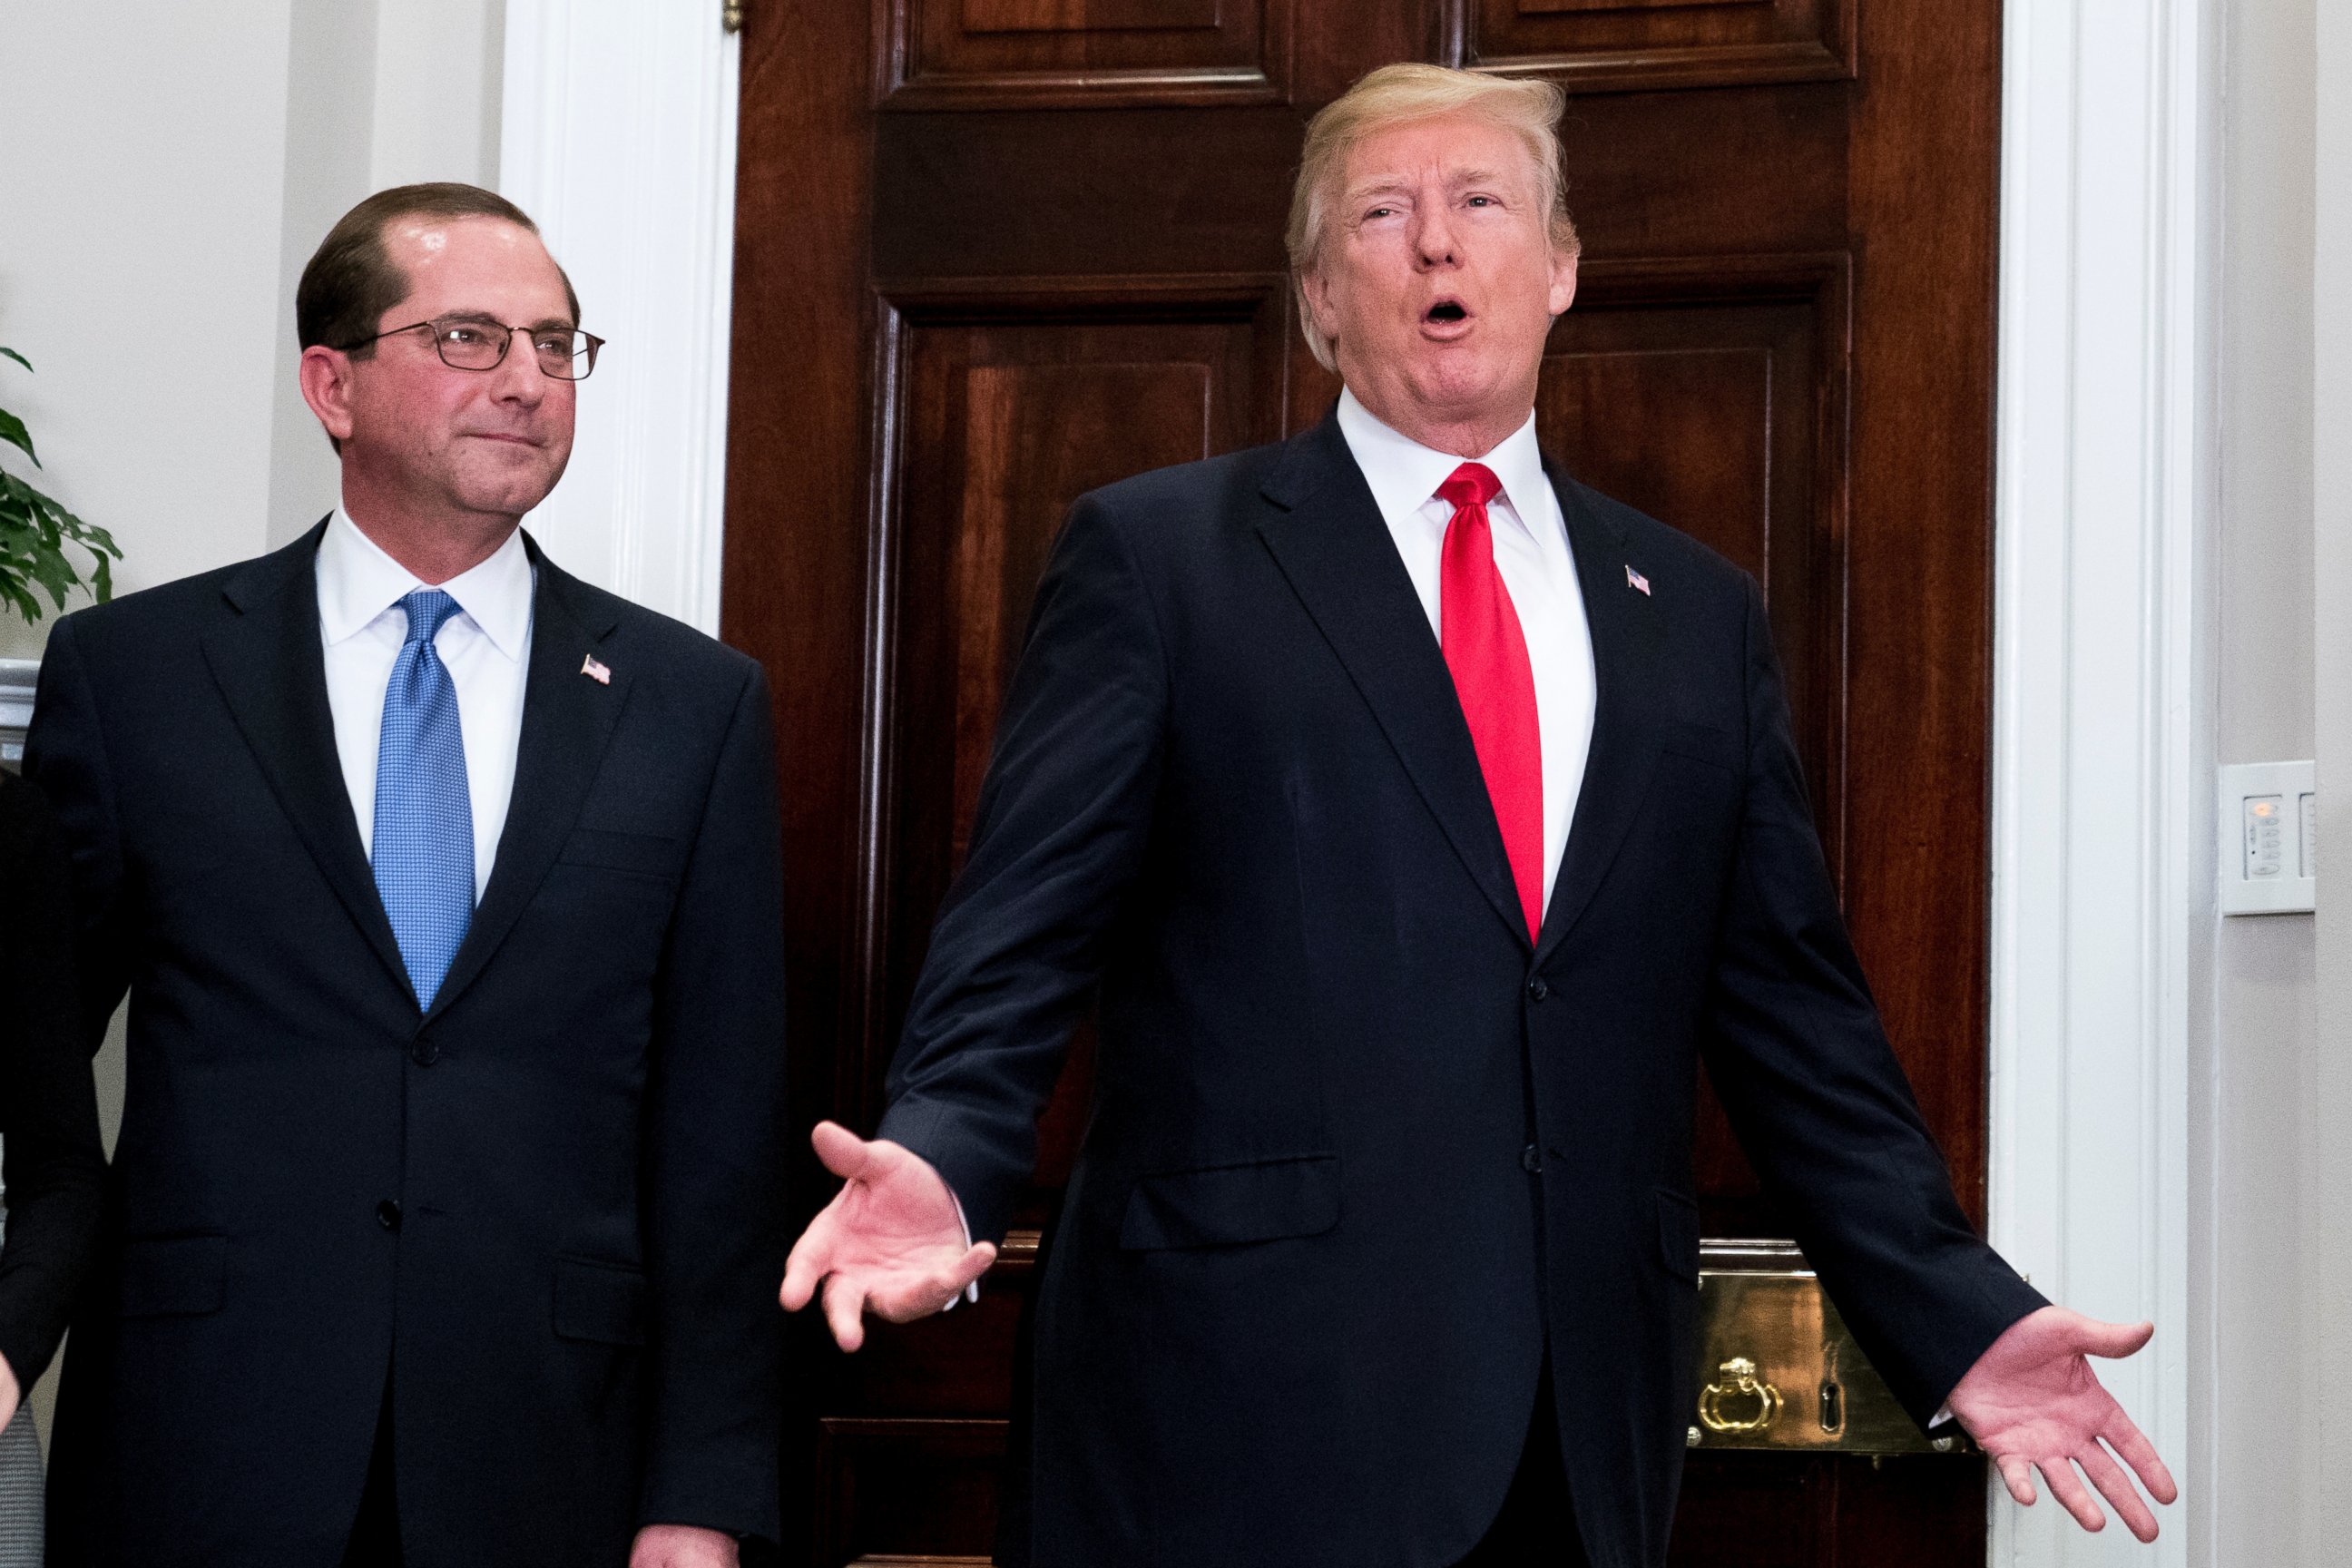 President Donald Trump, accompanied Health and Human Services Secretary Alex Azar, left, answers a reporters question after participating in a swearing in ceremony for Azar in the Roosevelt Room at the White House, Monday, Jan. 29, 2018.